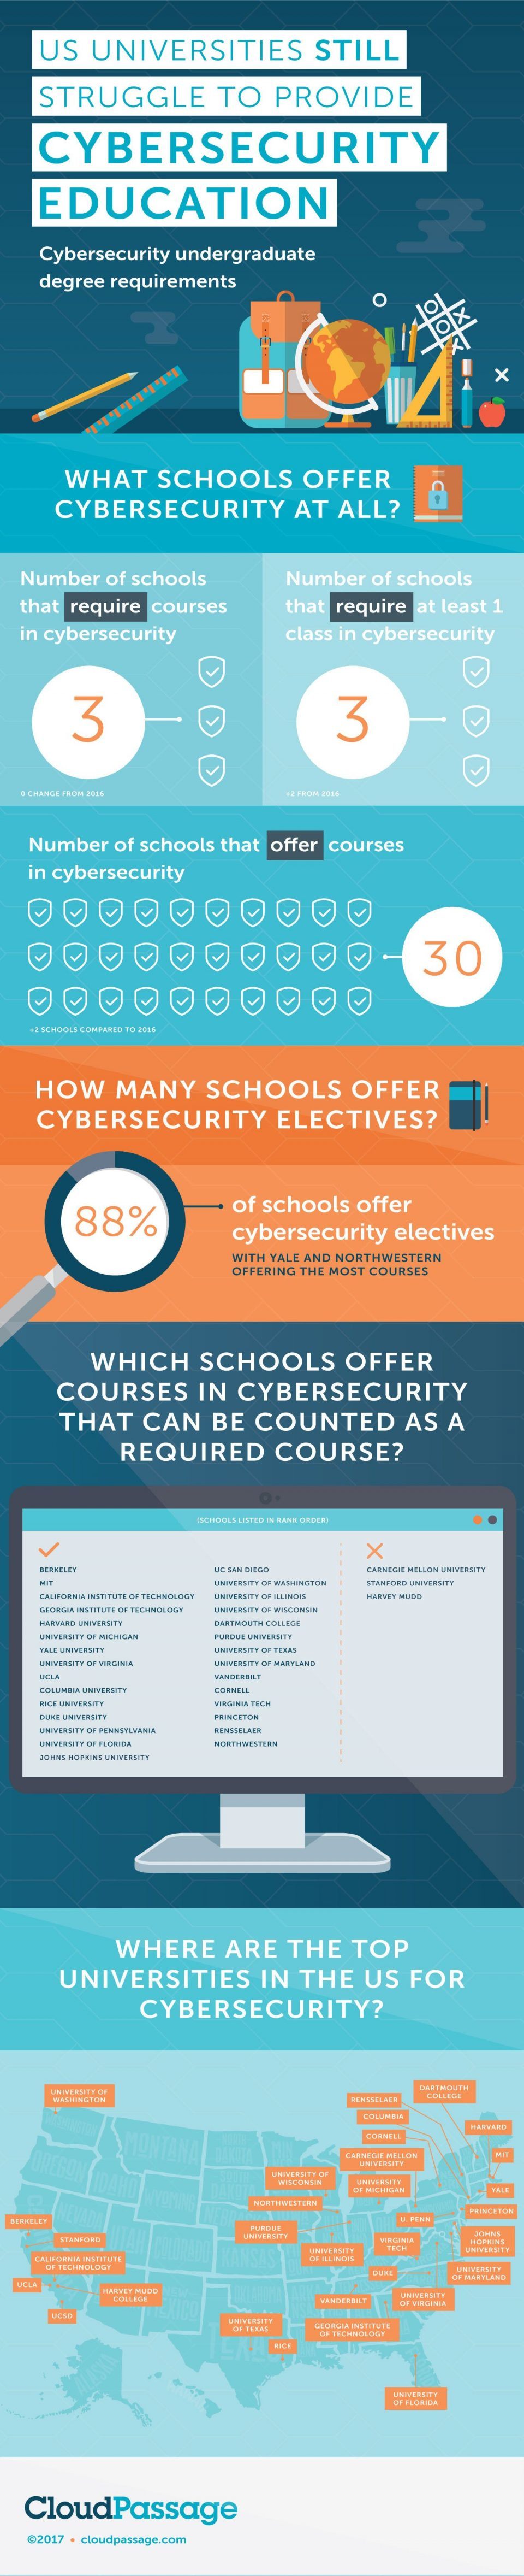 Universities and Cybersecurity Education Infographic